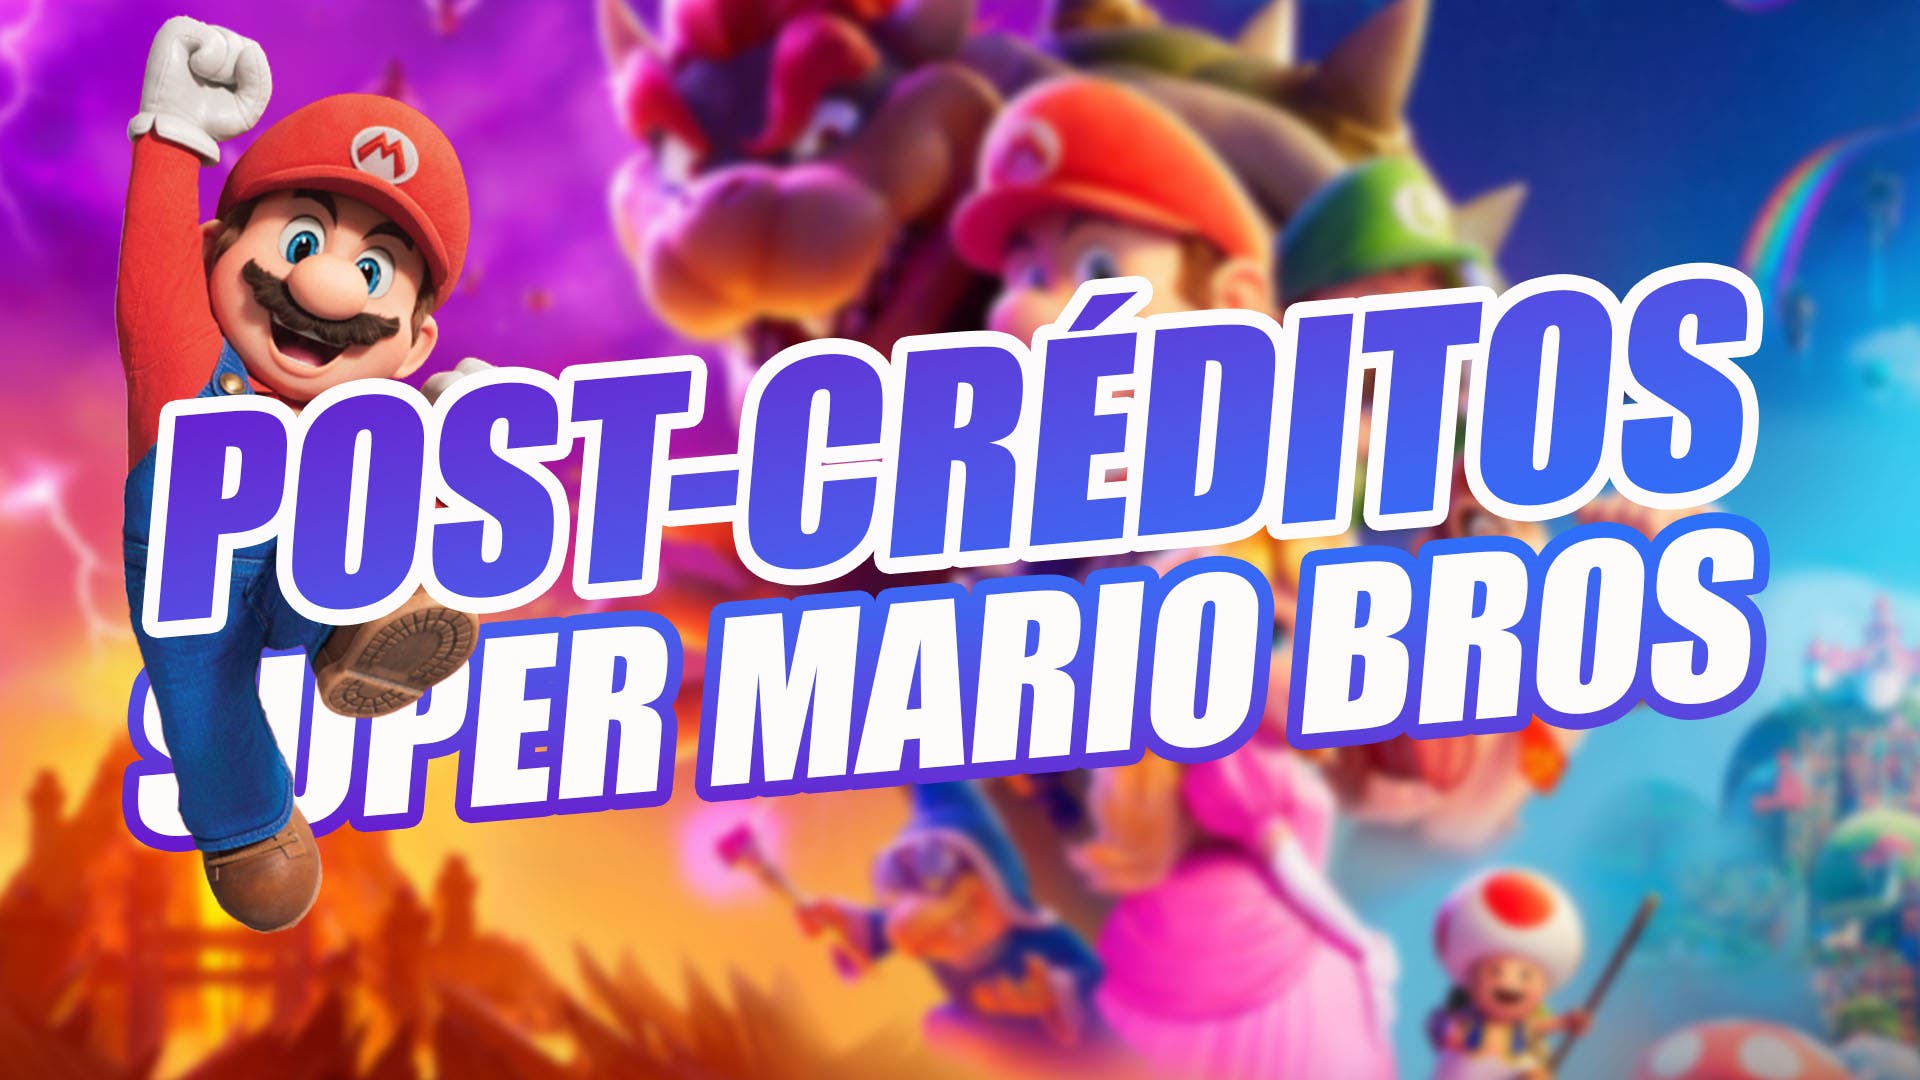 How many post-credits scenes does Super Mario Bros.: The Movie have?